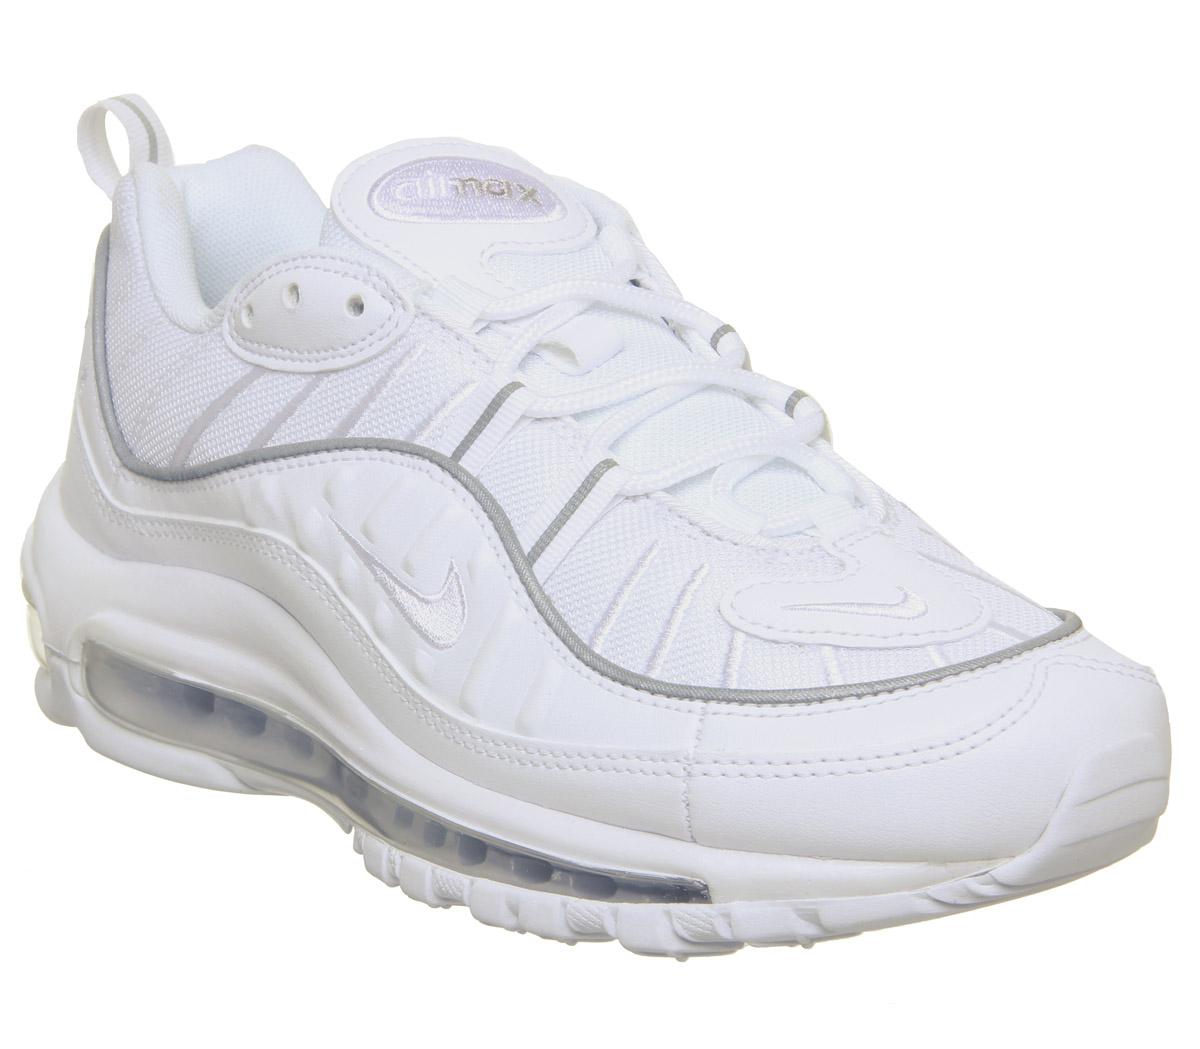 Nike Air Max 98 Trainers White - Hers 